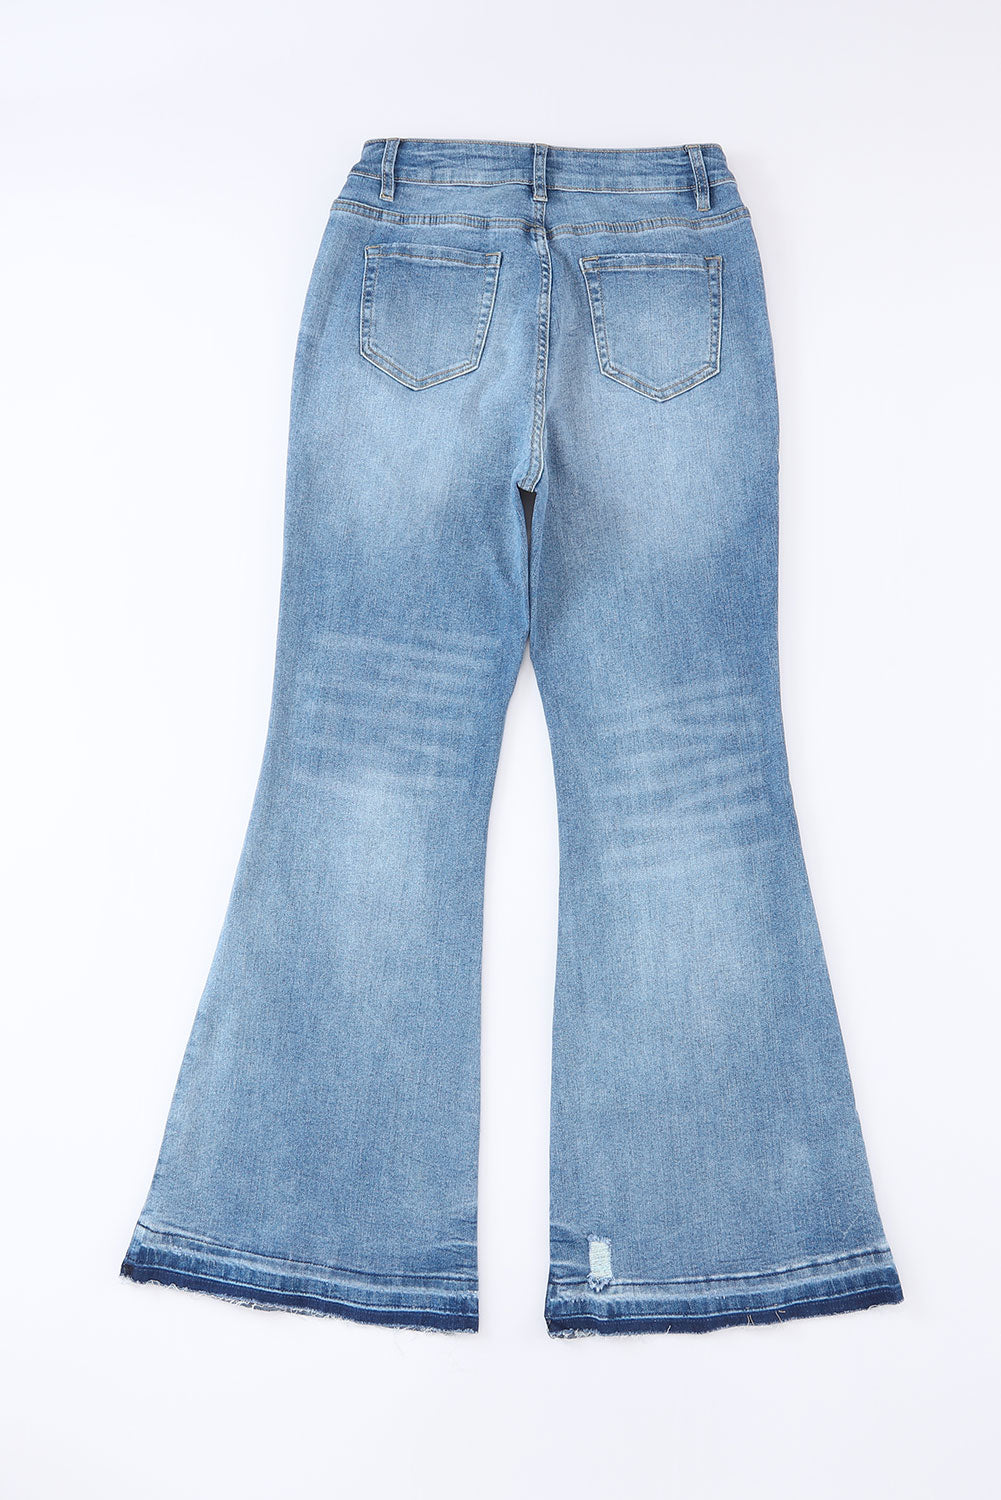 Blue Light Wash High Waisted Bell Bottom Jeans - Bellisima Clothing Collective